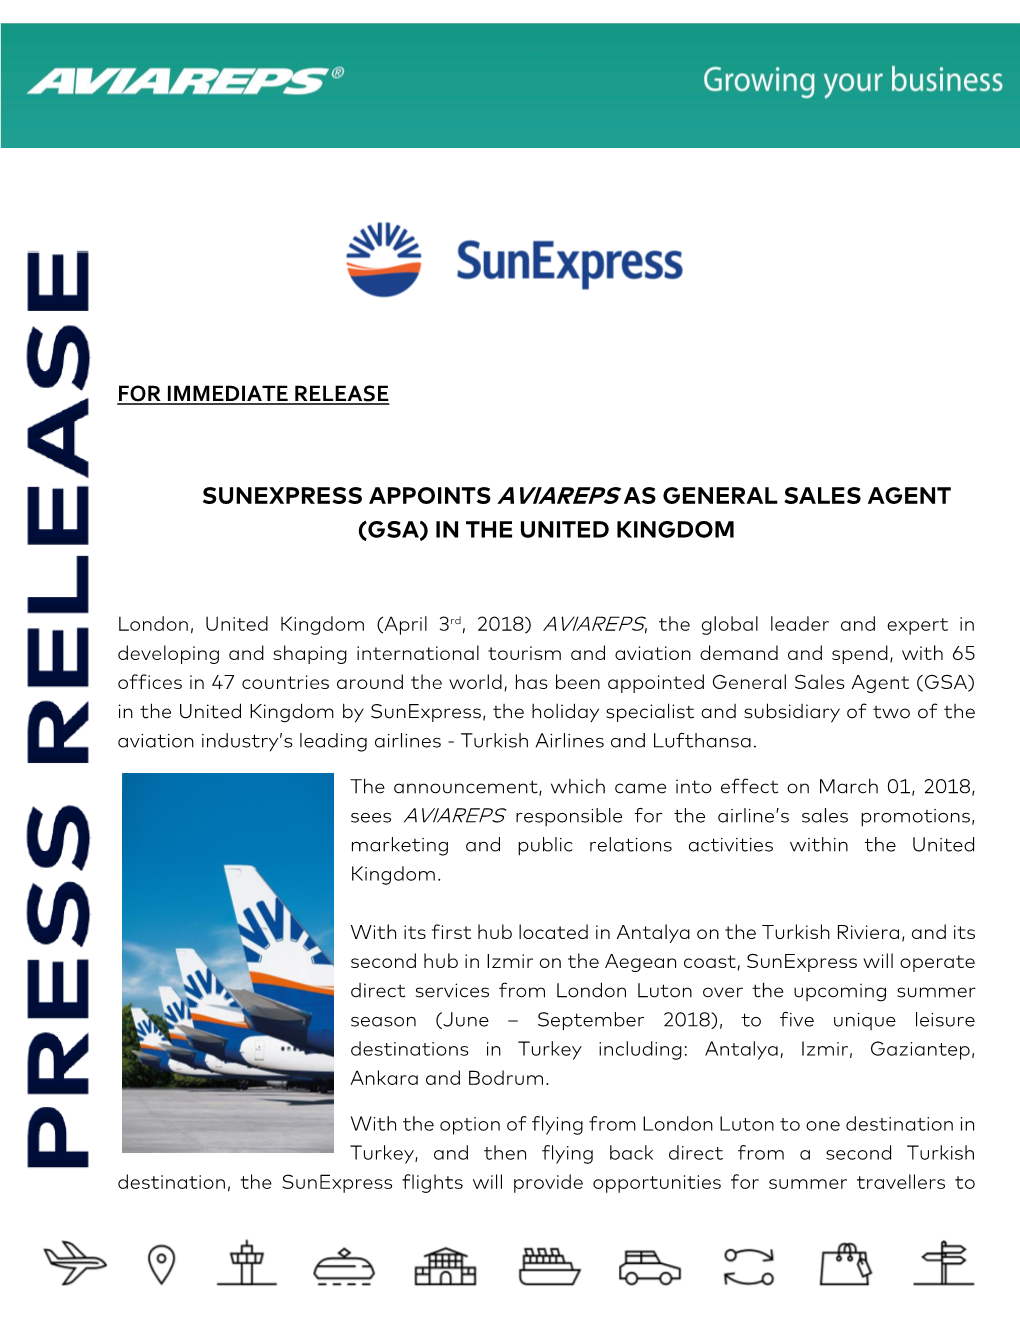 For Immediate Release Sunexpress Appoints Aviareps As General Sales